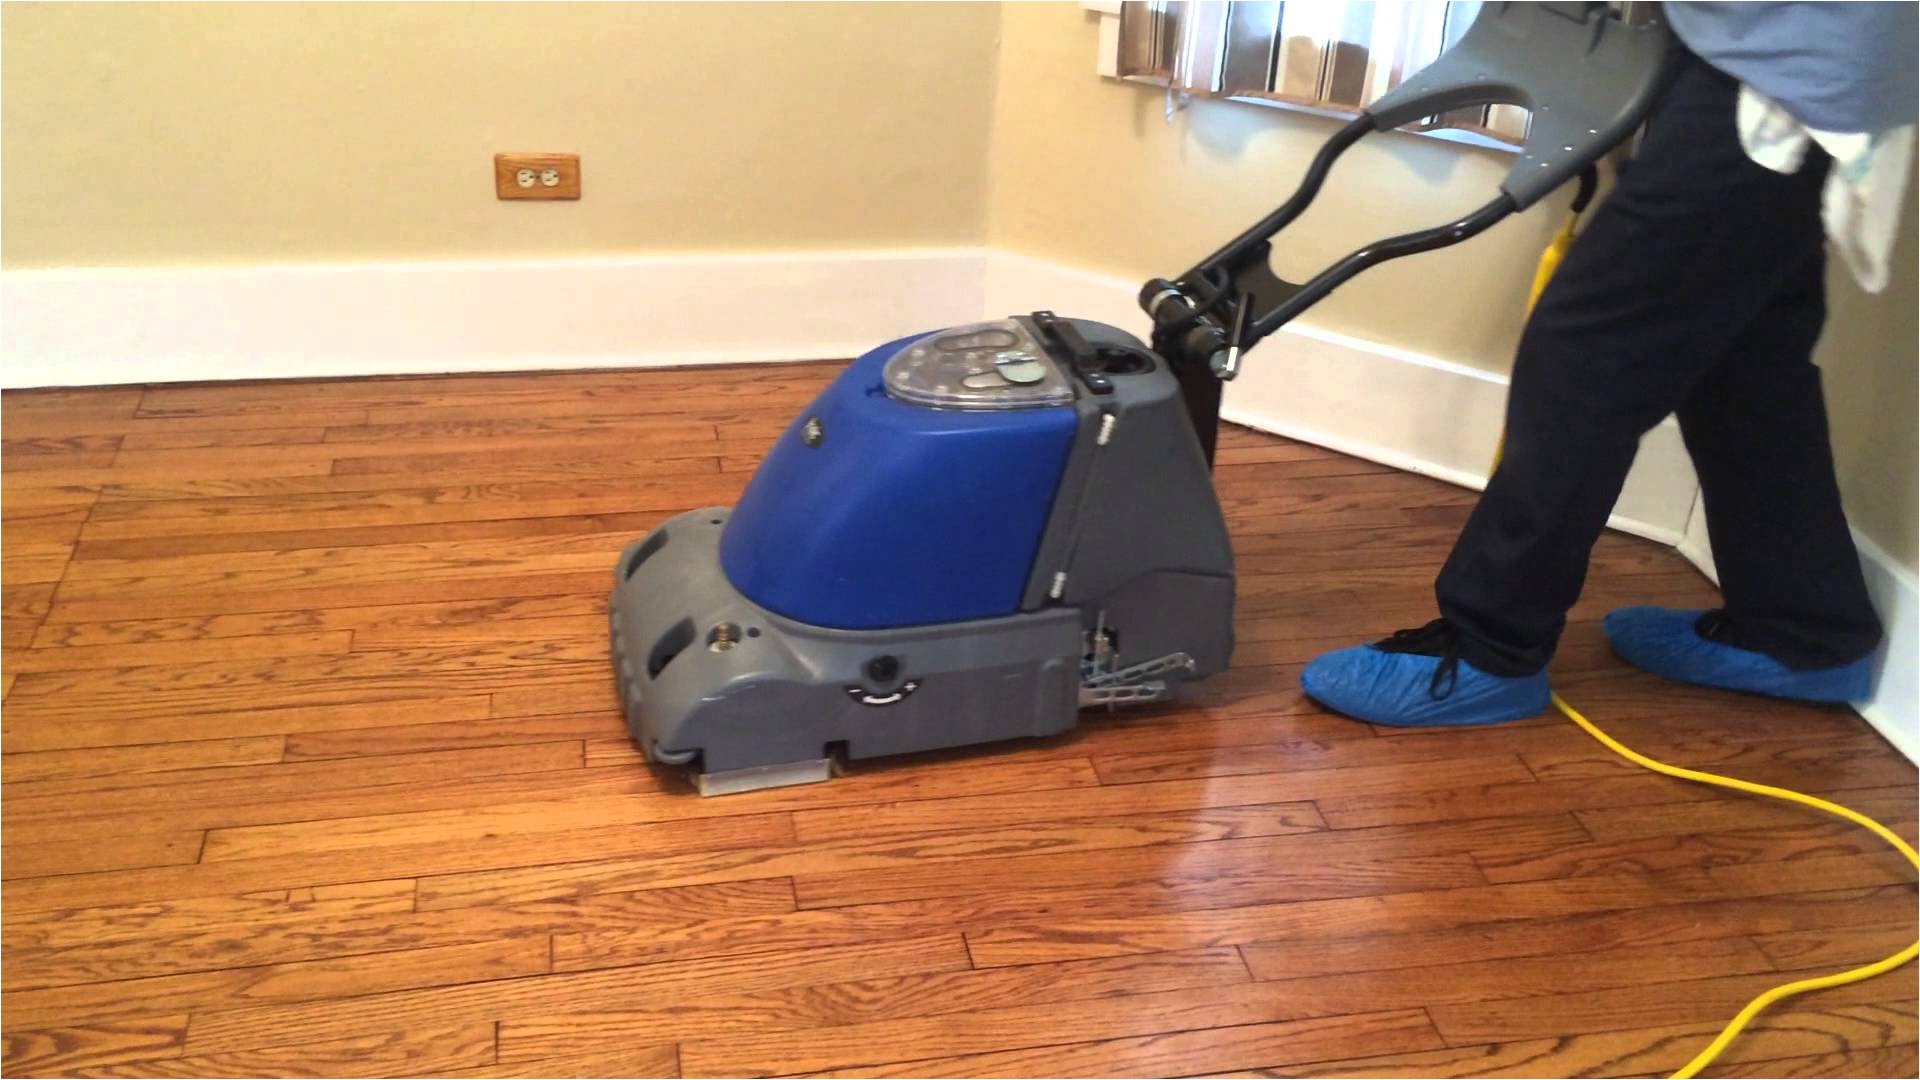 Best Steam Vacuum Cleaner for Hardwood Floors Hardwood Floor Cleaning Best Way to Clean Hardwood What is the